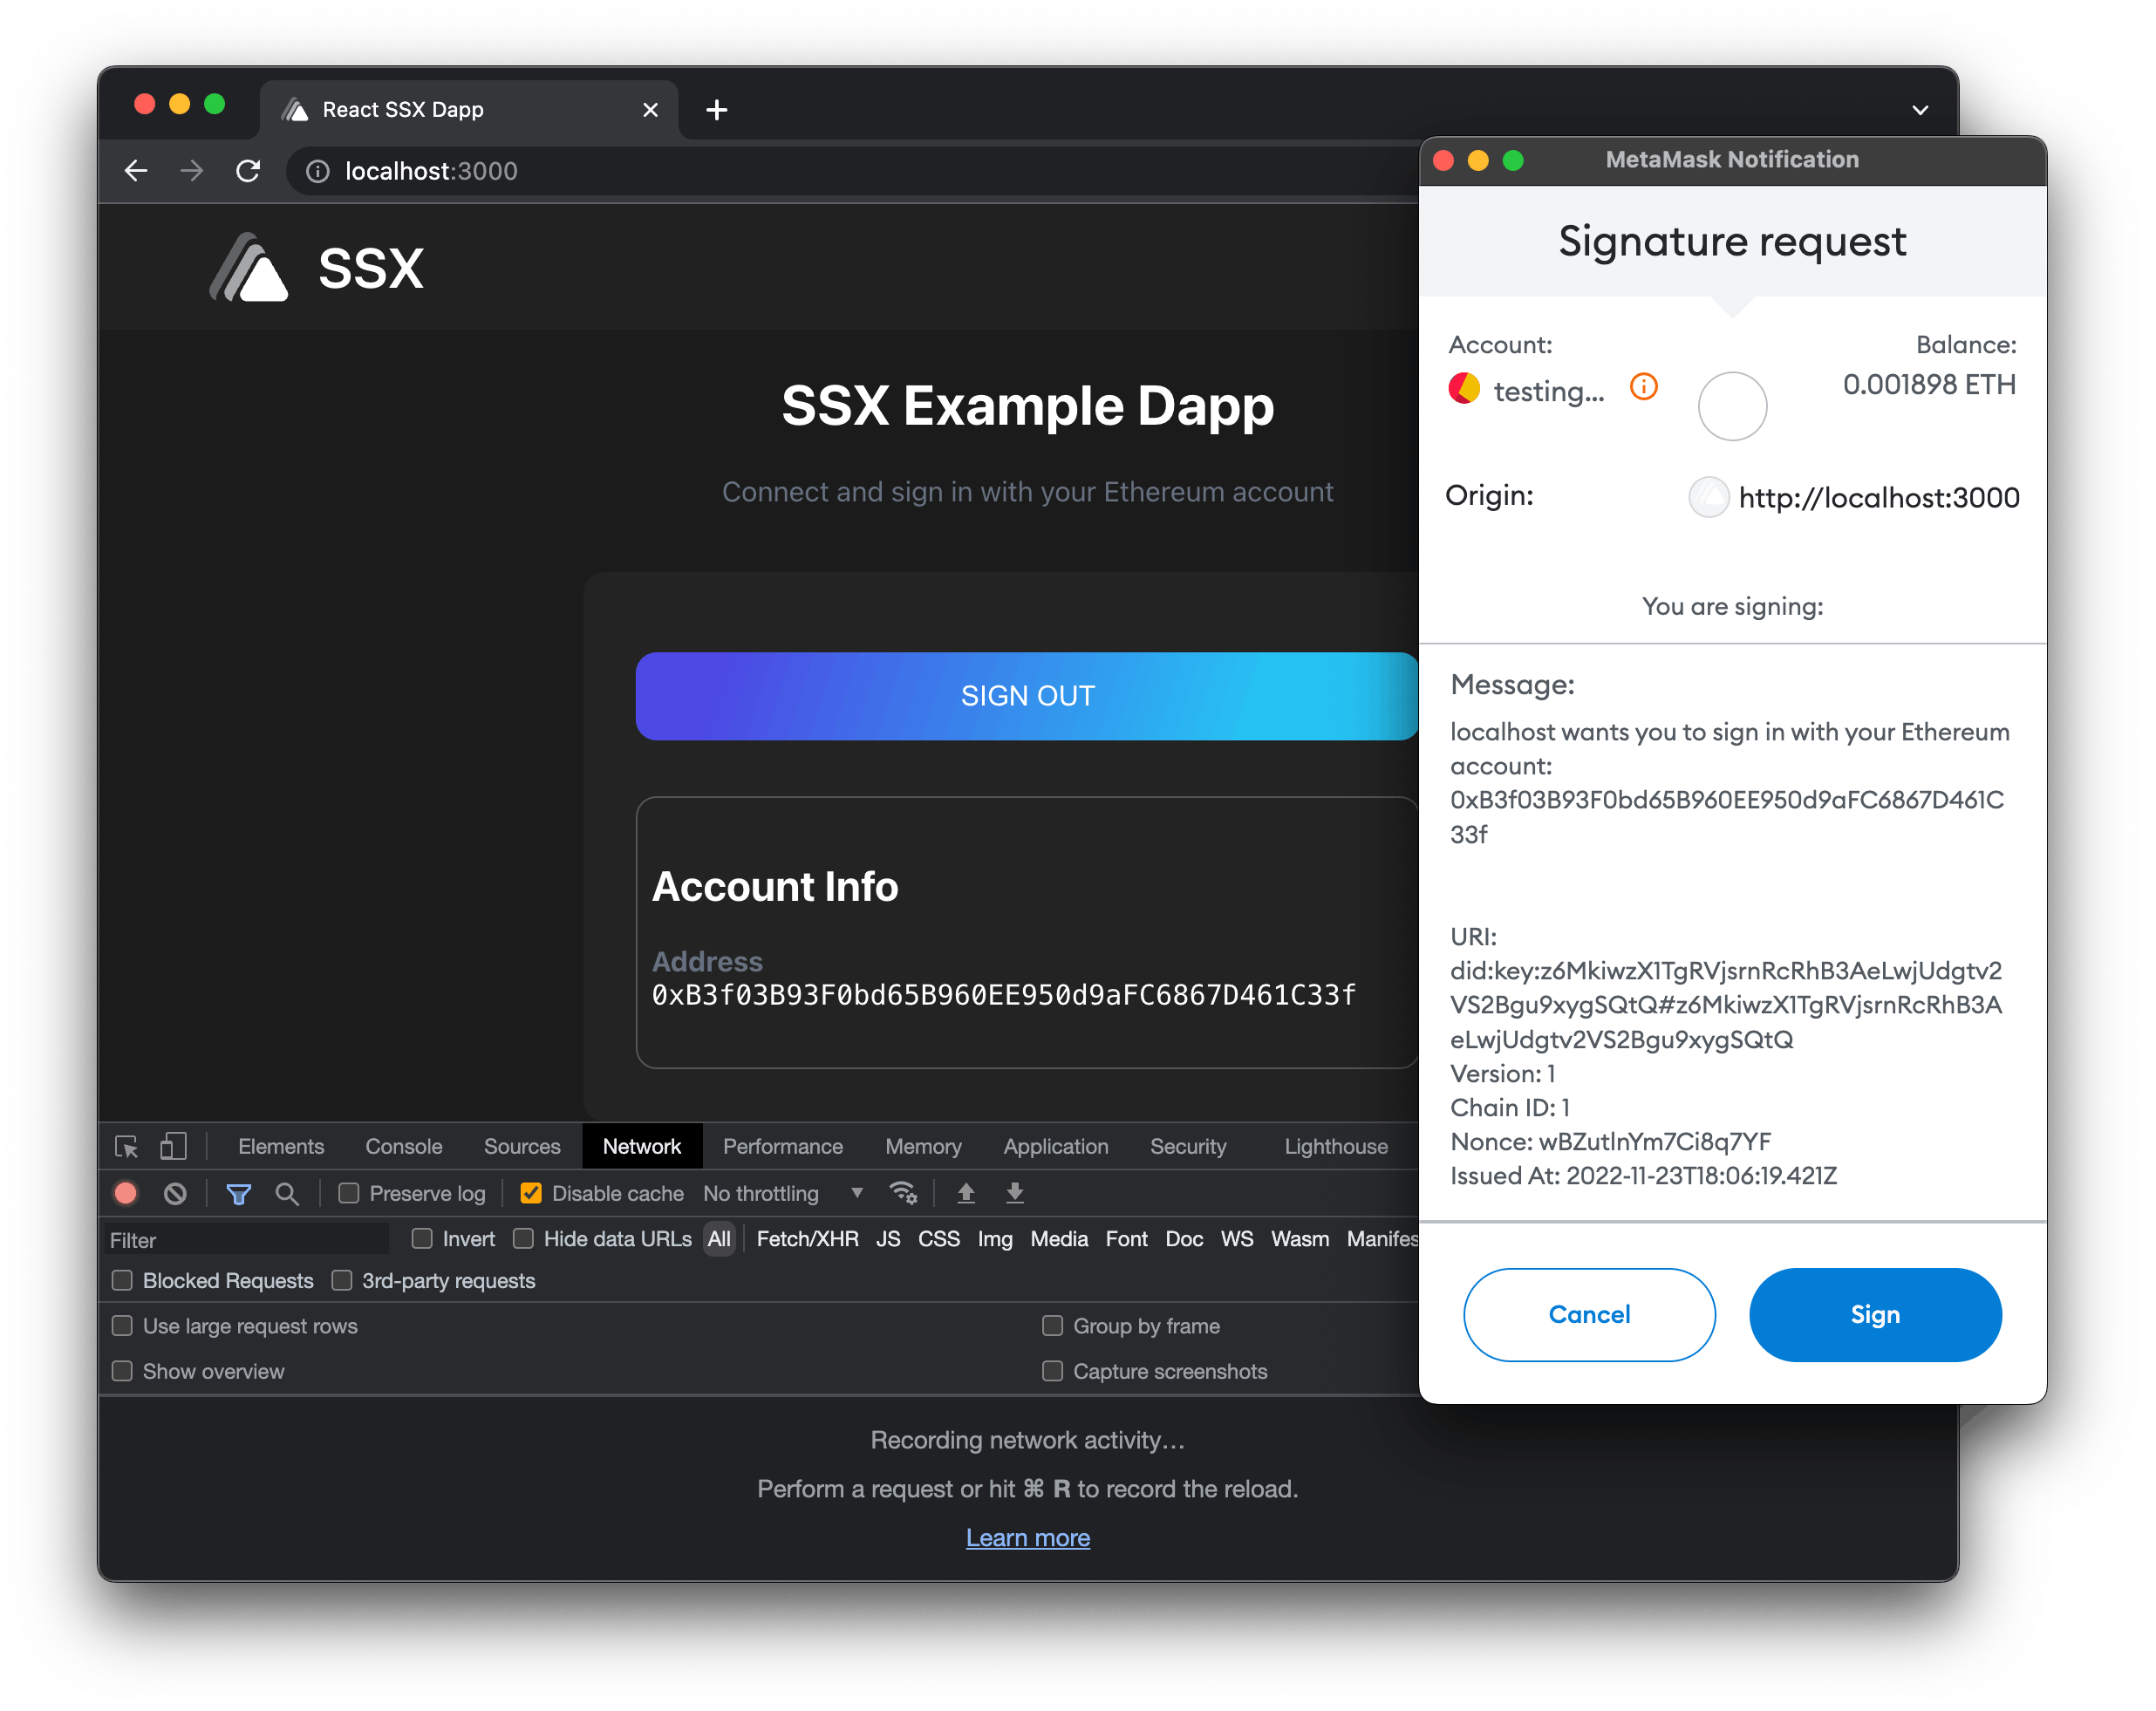 SSX Example Dapp SIWE Not Network Requests